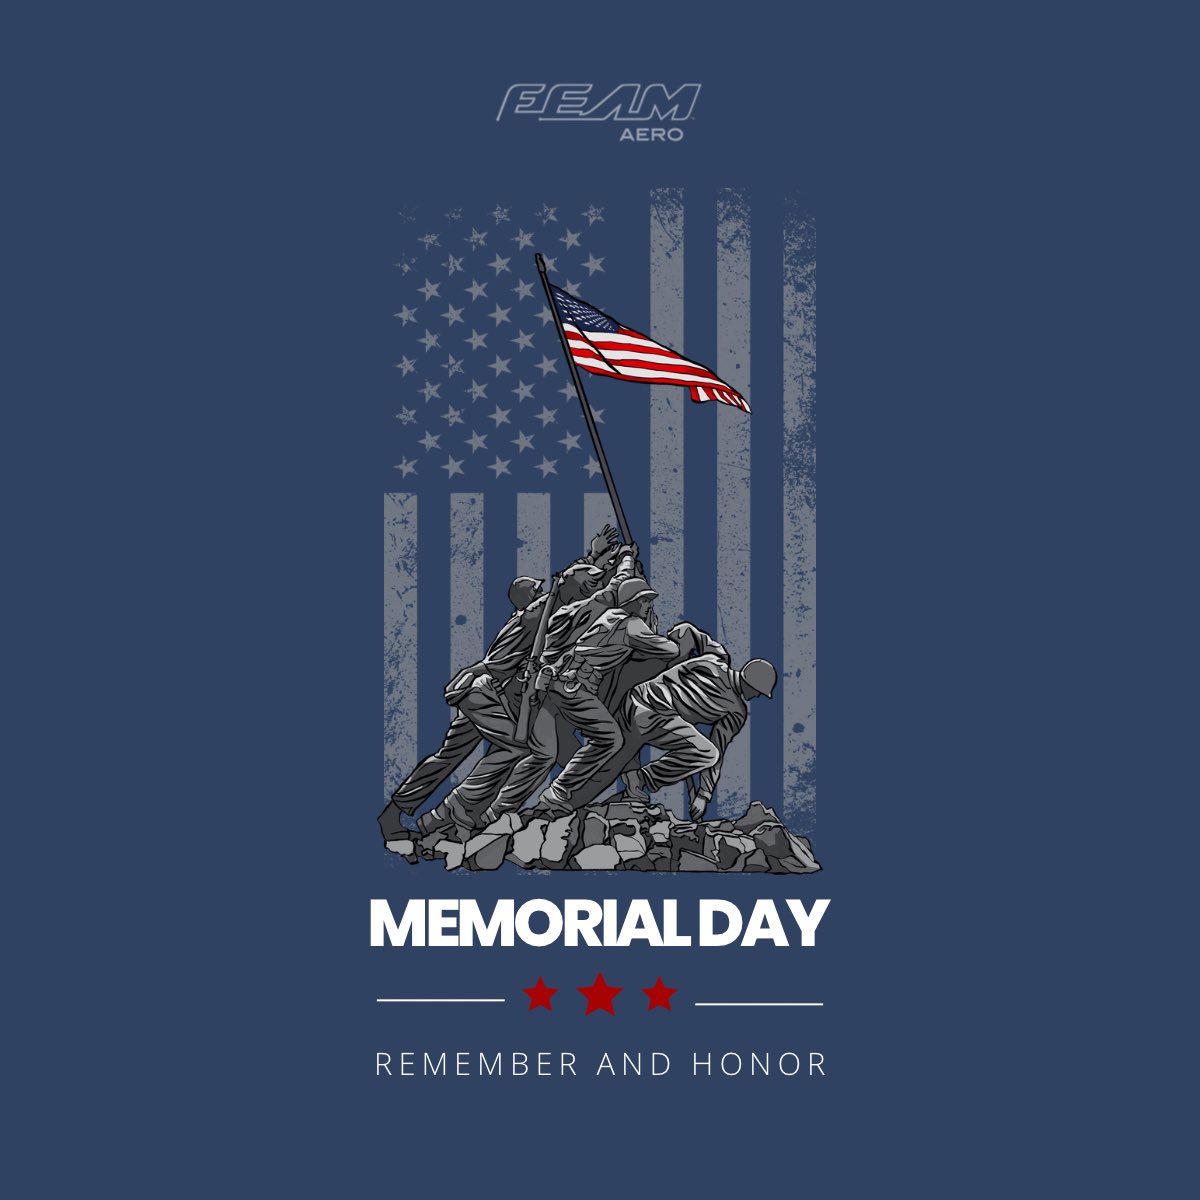 On this special day, let’s remember all our brave soldiers who made the ultimate sacrifice. Happy Memorial Day from FEAM Aero. 

#memorialday #memorialdayweekend #aviation #aircraftmaintenance #rememberandhonor